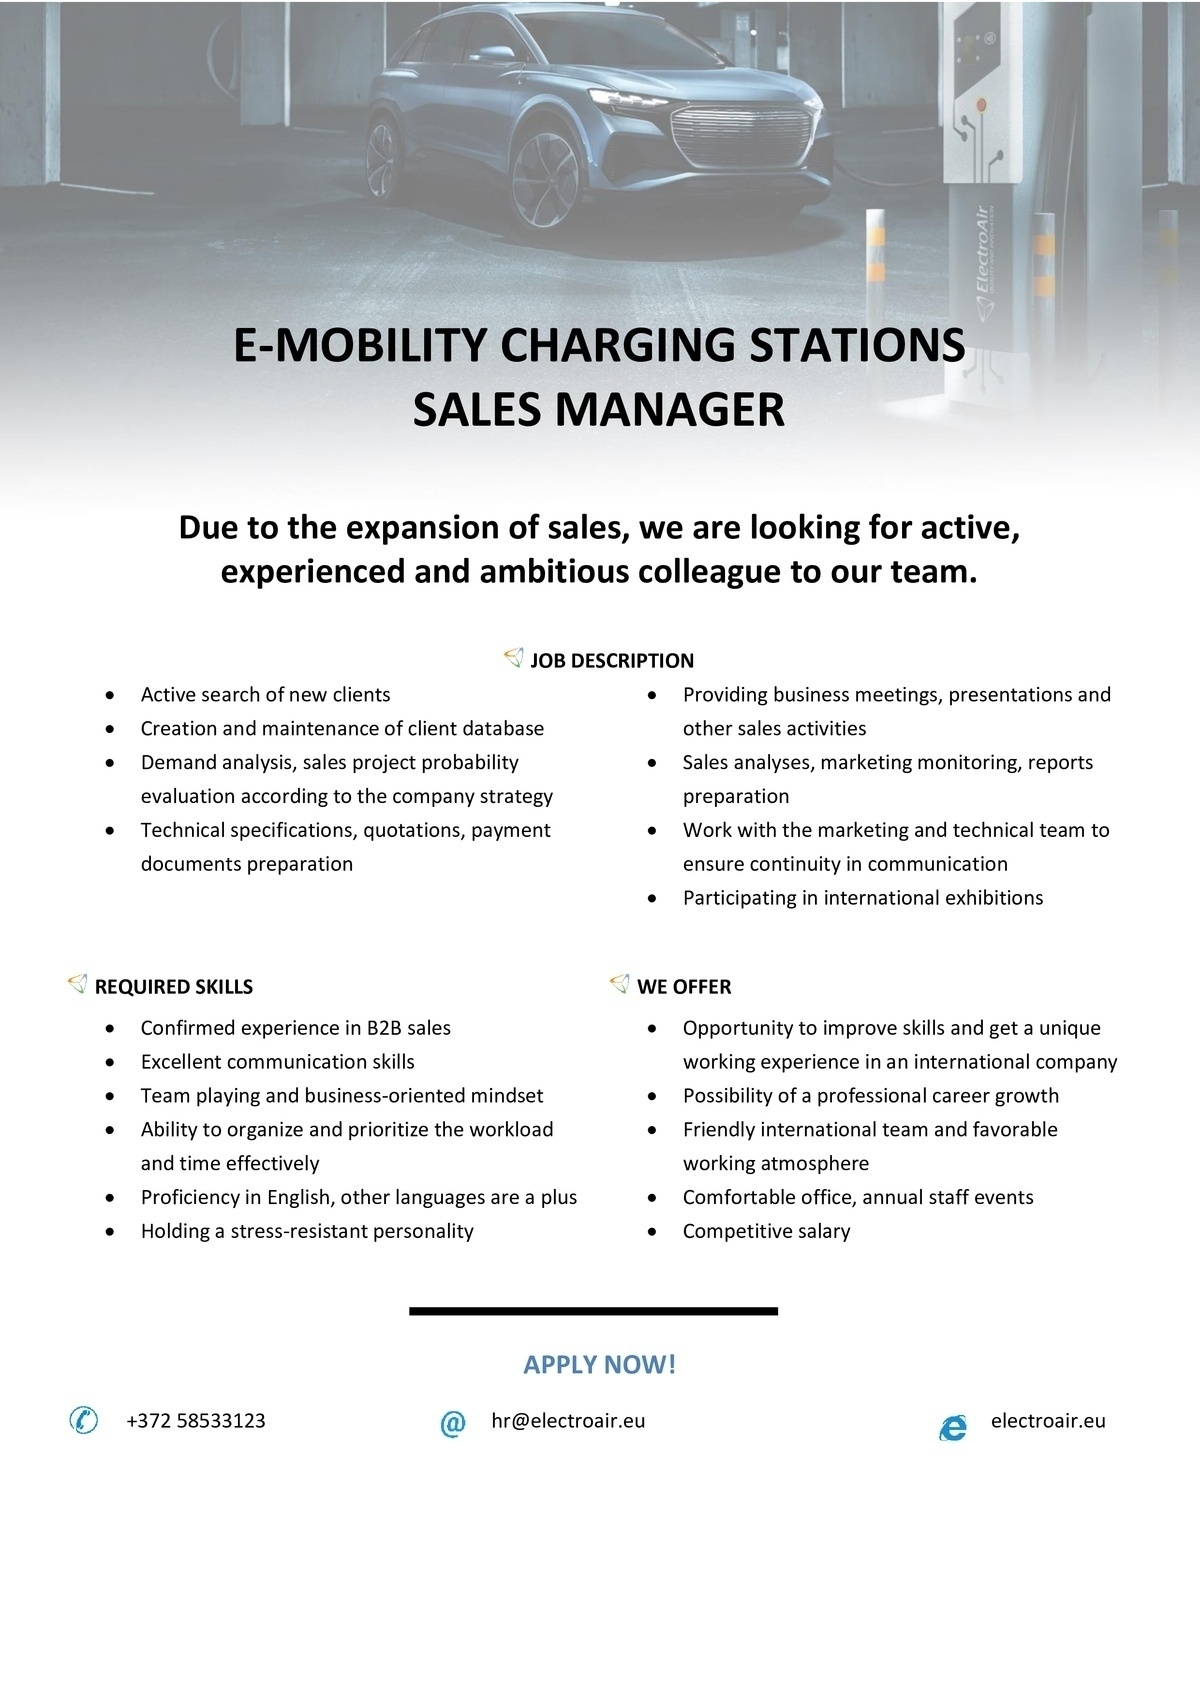 CVKeskus.ee client E-MOBILITY CHARGING STATIONS SALES MANAGER